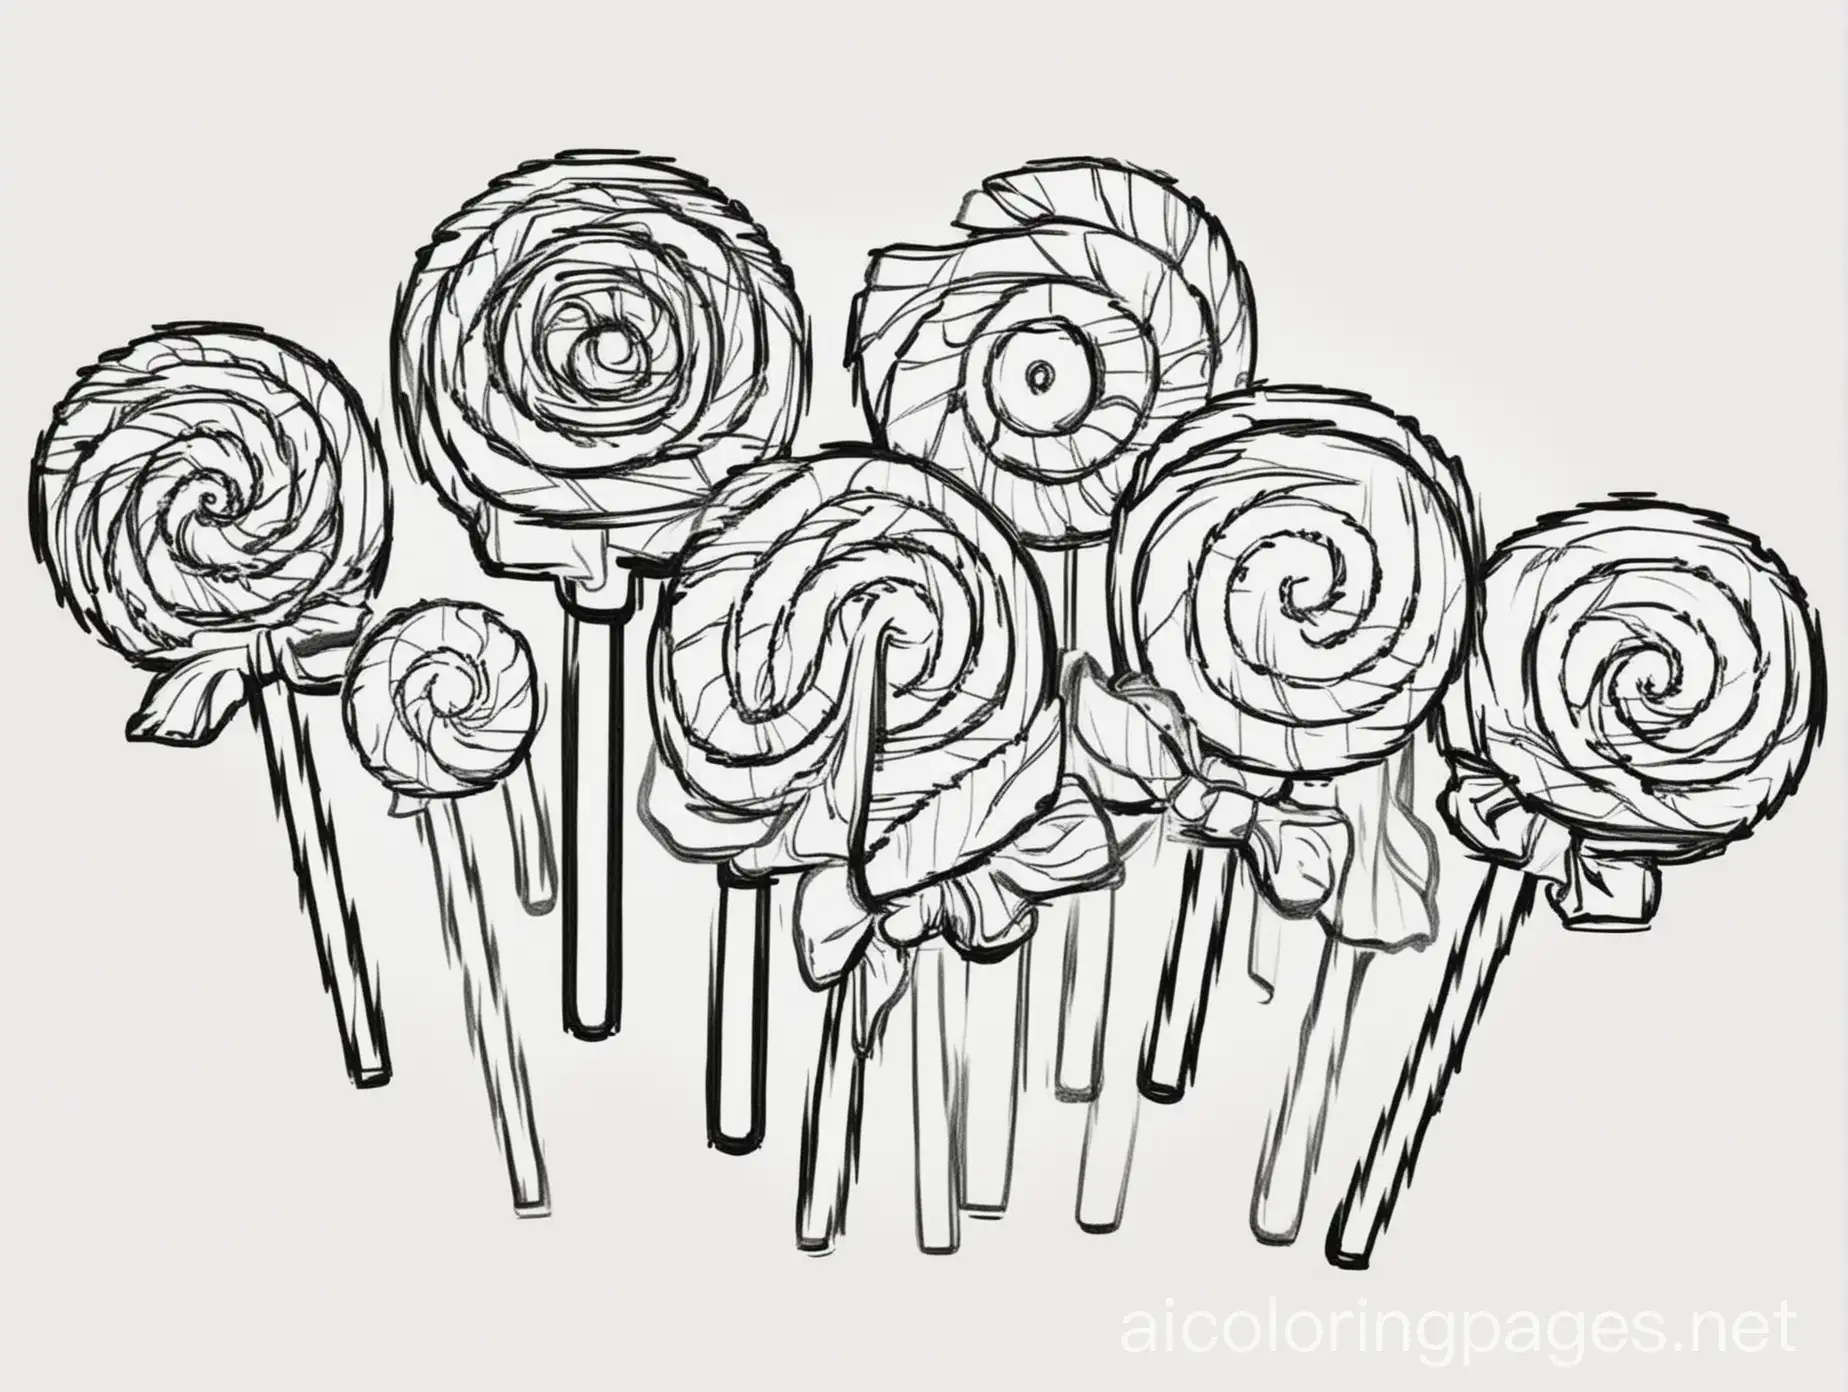 Assortment-of-Candies-Coloring-Page-Simple-Black-and-White-Line-Art-for-Kids